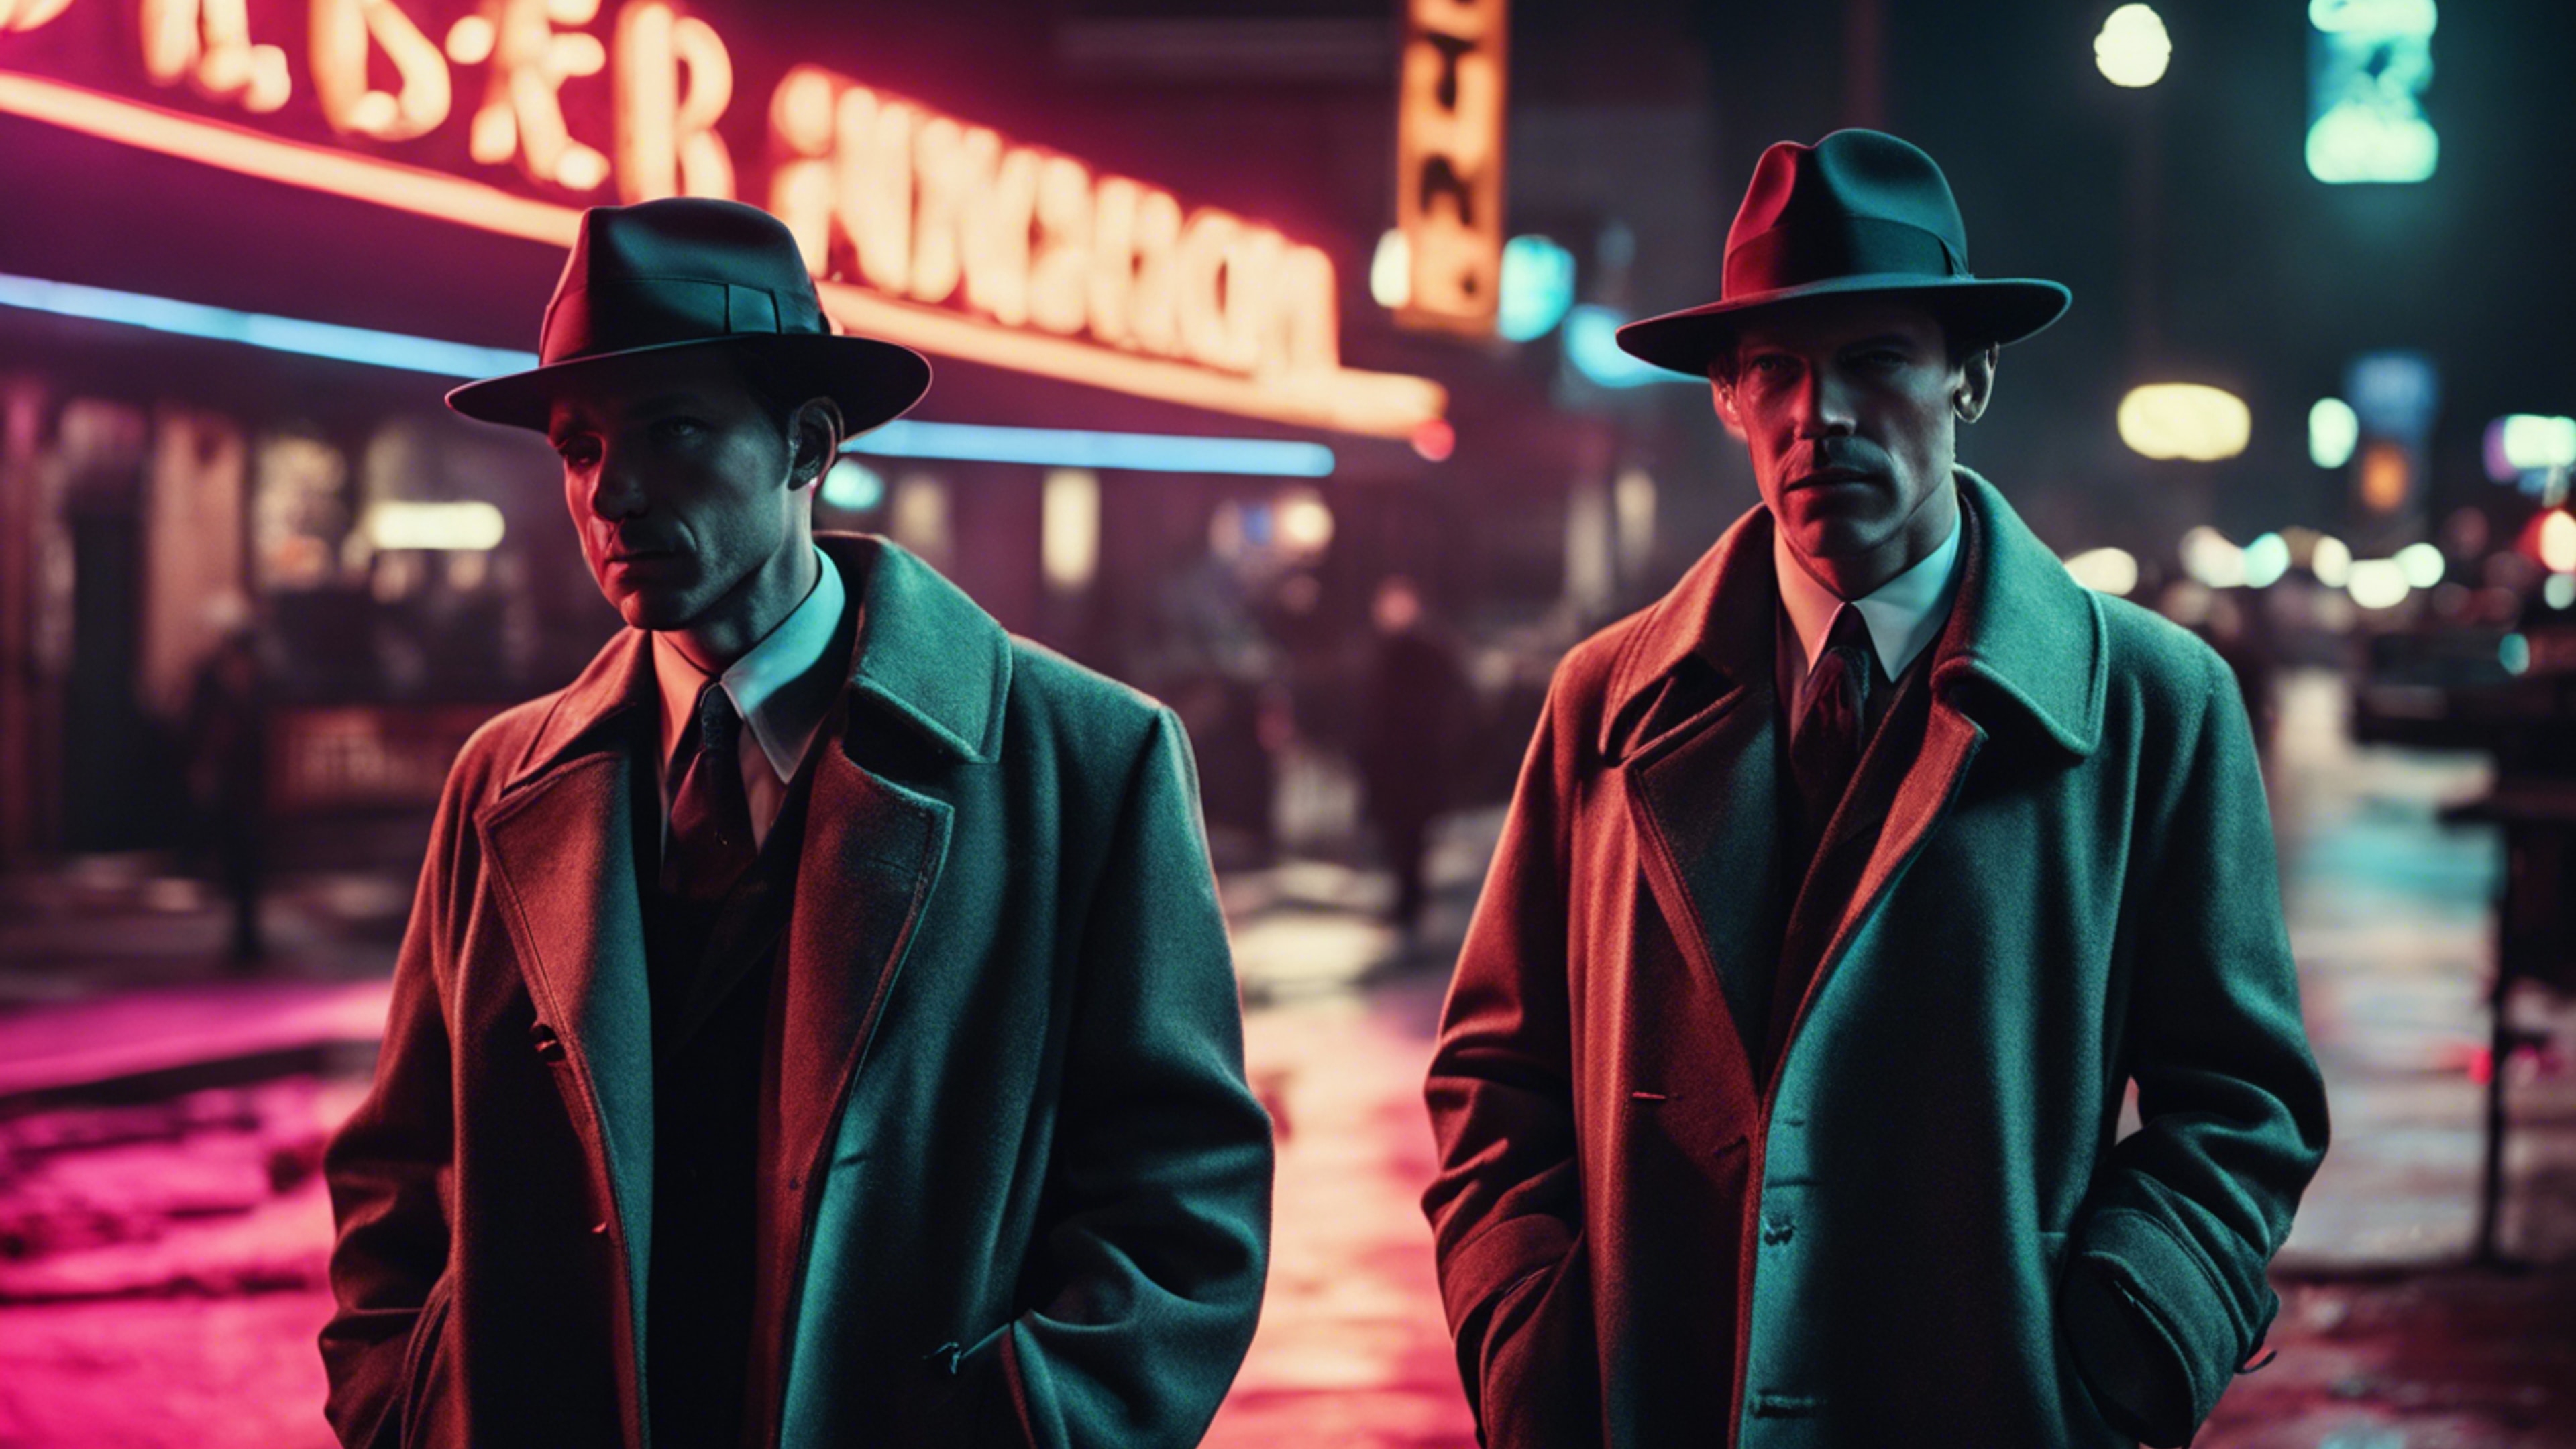 An old-timey noir detective scene, complete with fedoras and trench coats, but with a cool, modern neon black aesthetic. کاغذ دیواری[1130d0c9b589467184c0]